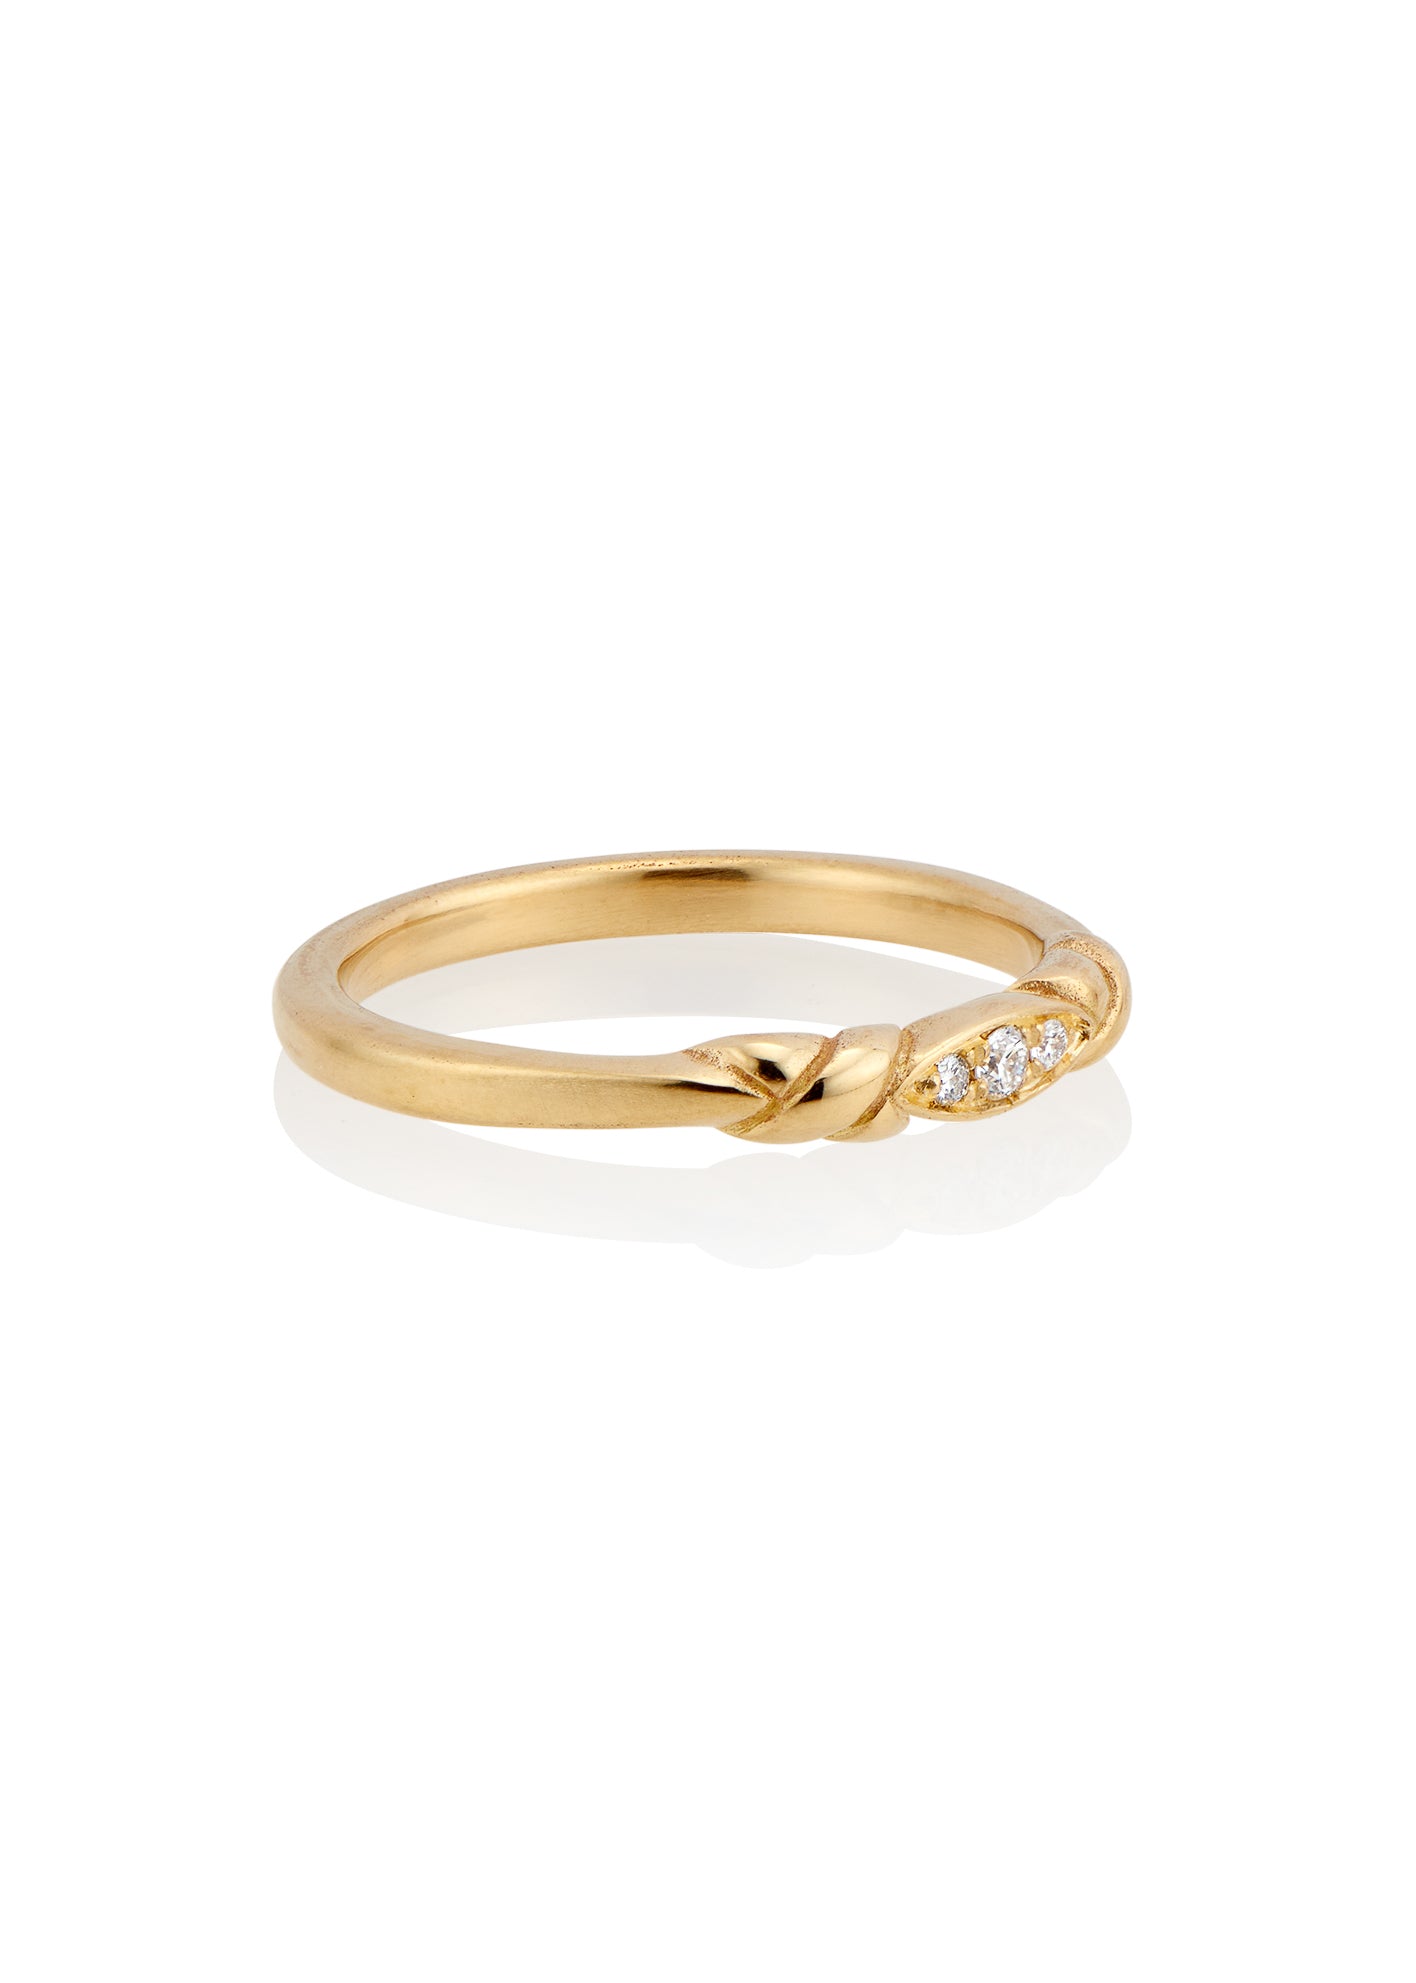 An engagement ring re-imagined, the Kiat ring was inspired by a proposal among sun-soaked cattails and waves lapping the shores of a hidden inlet. A gold band criss-crosses on either side of a trio of diamonds—a piece imbued with promise. 